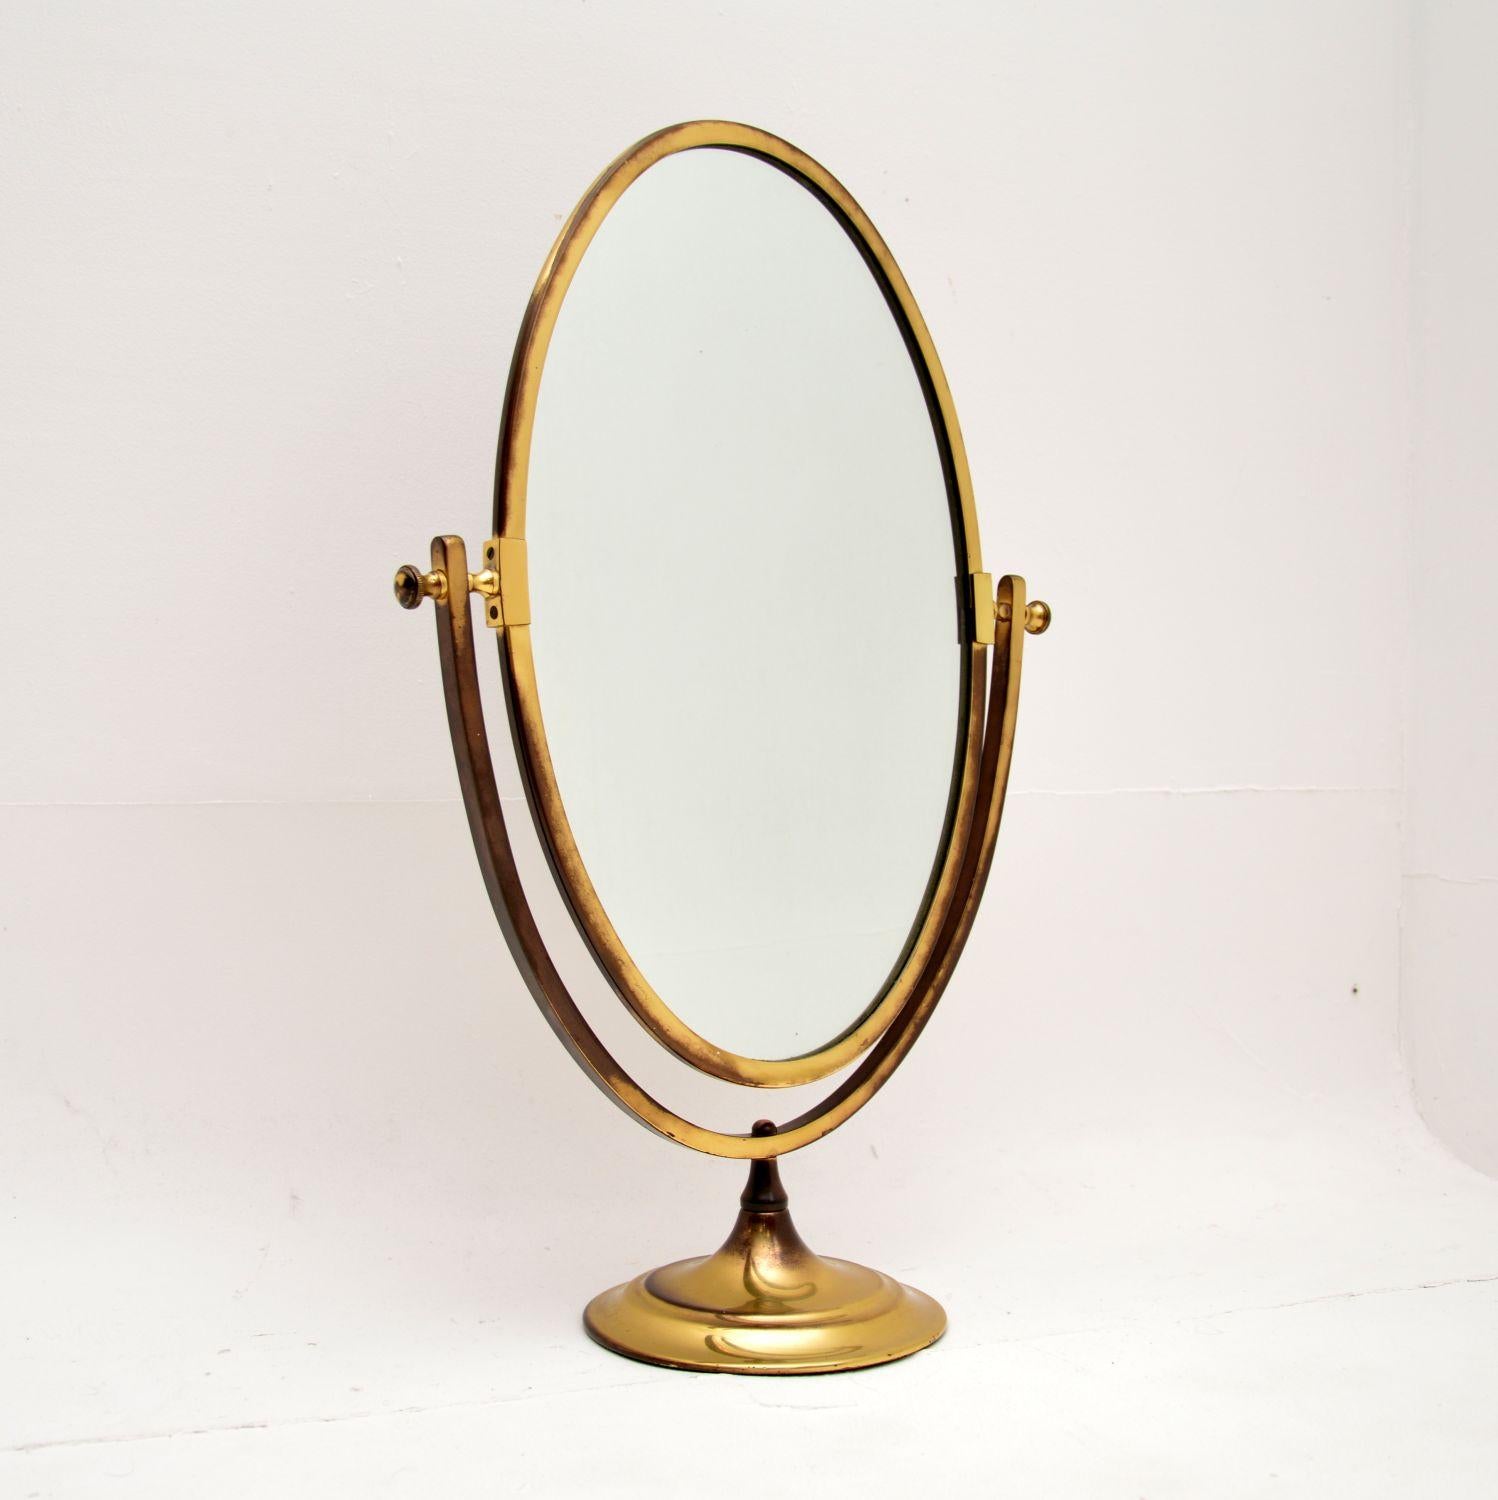 A fantastic vintage brass table top vanity mirror. This was made in England it dates from the 1950’s.

It is much larger than those more commonly seen, the quality is superb. The mirror can be tilted to various angles, the back is finished in brown